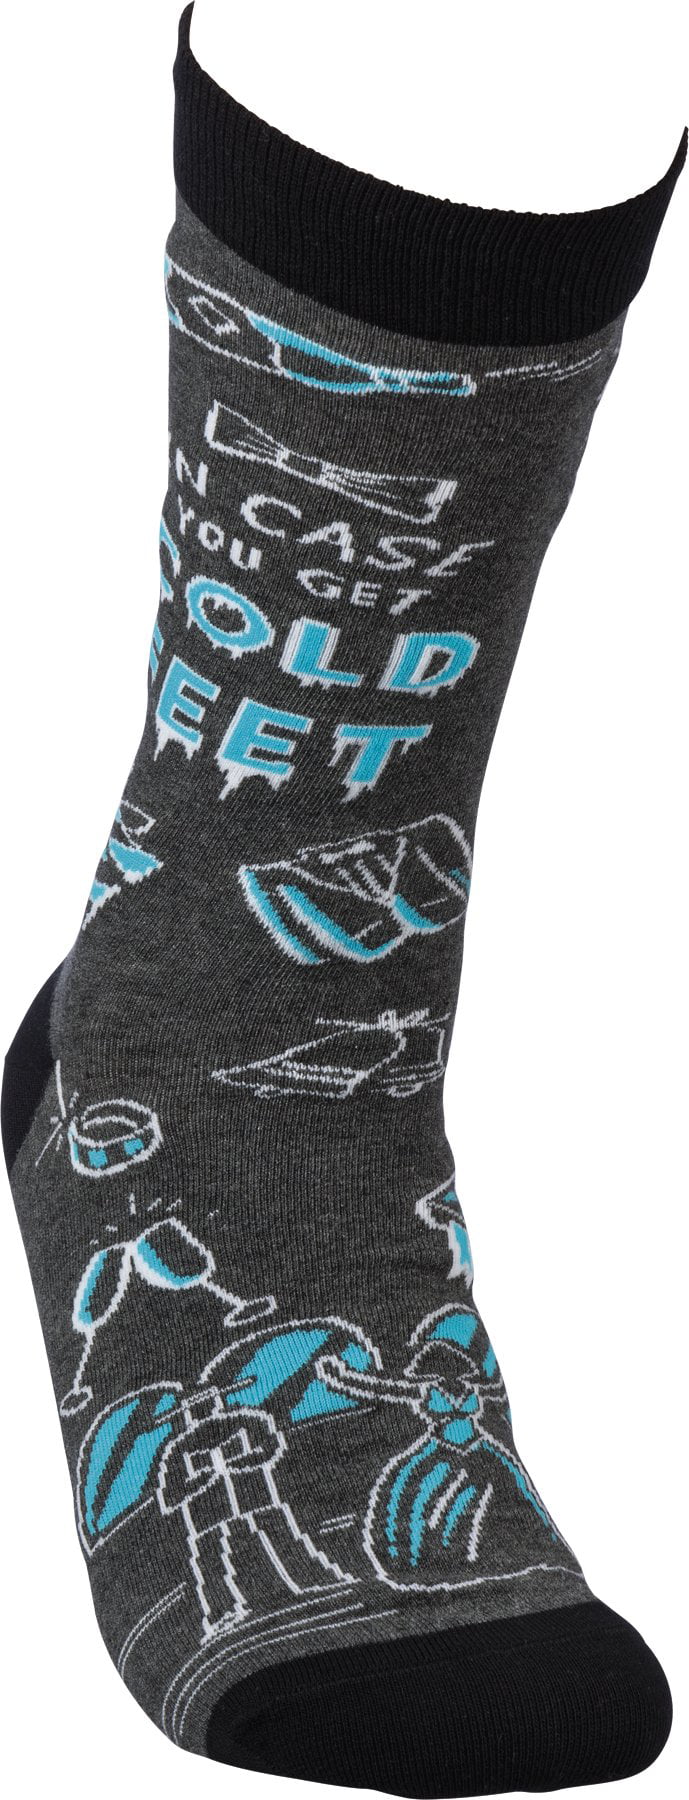 In Case You Get Cold Feet Crew Black Blue Funny Novelty Socks with Coo –  The Bullish Store